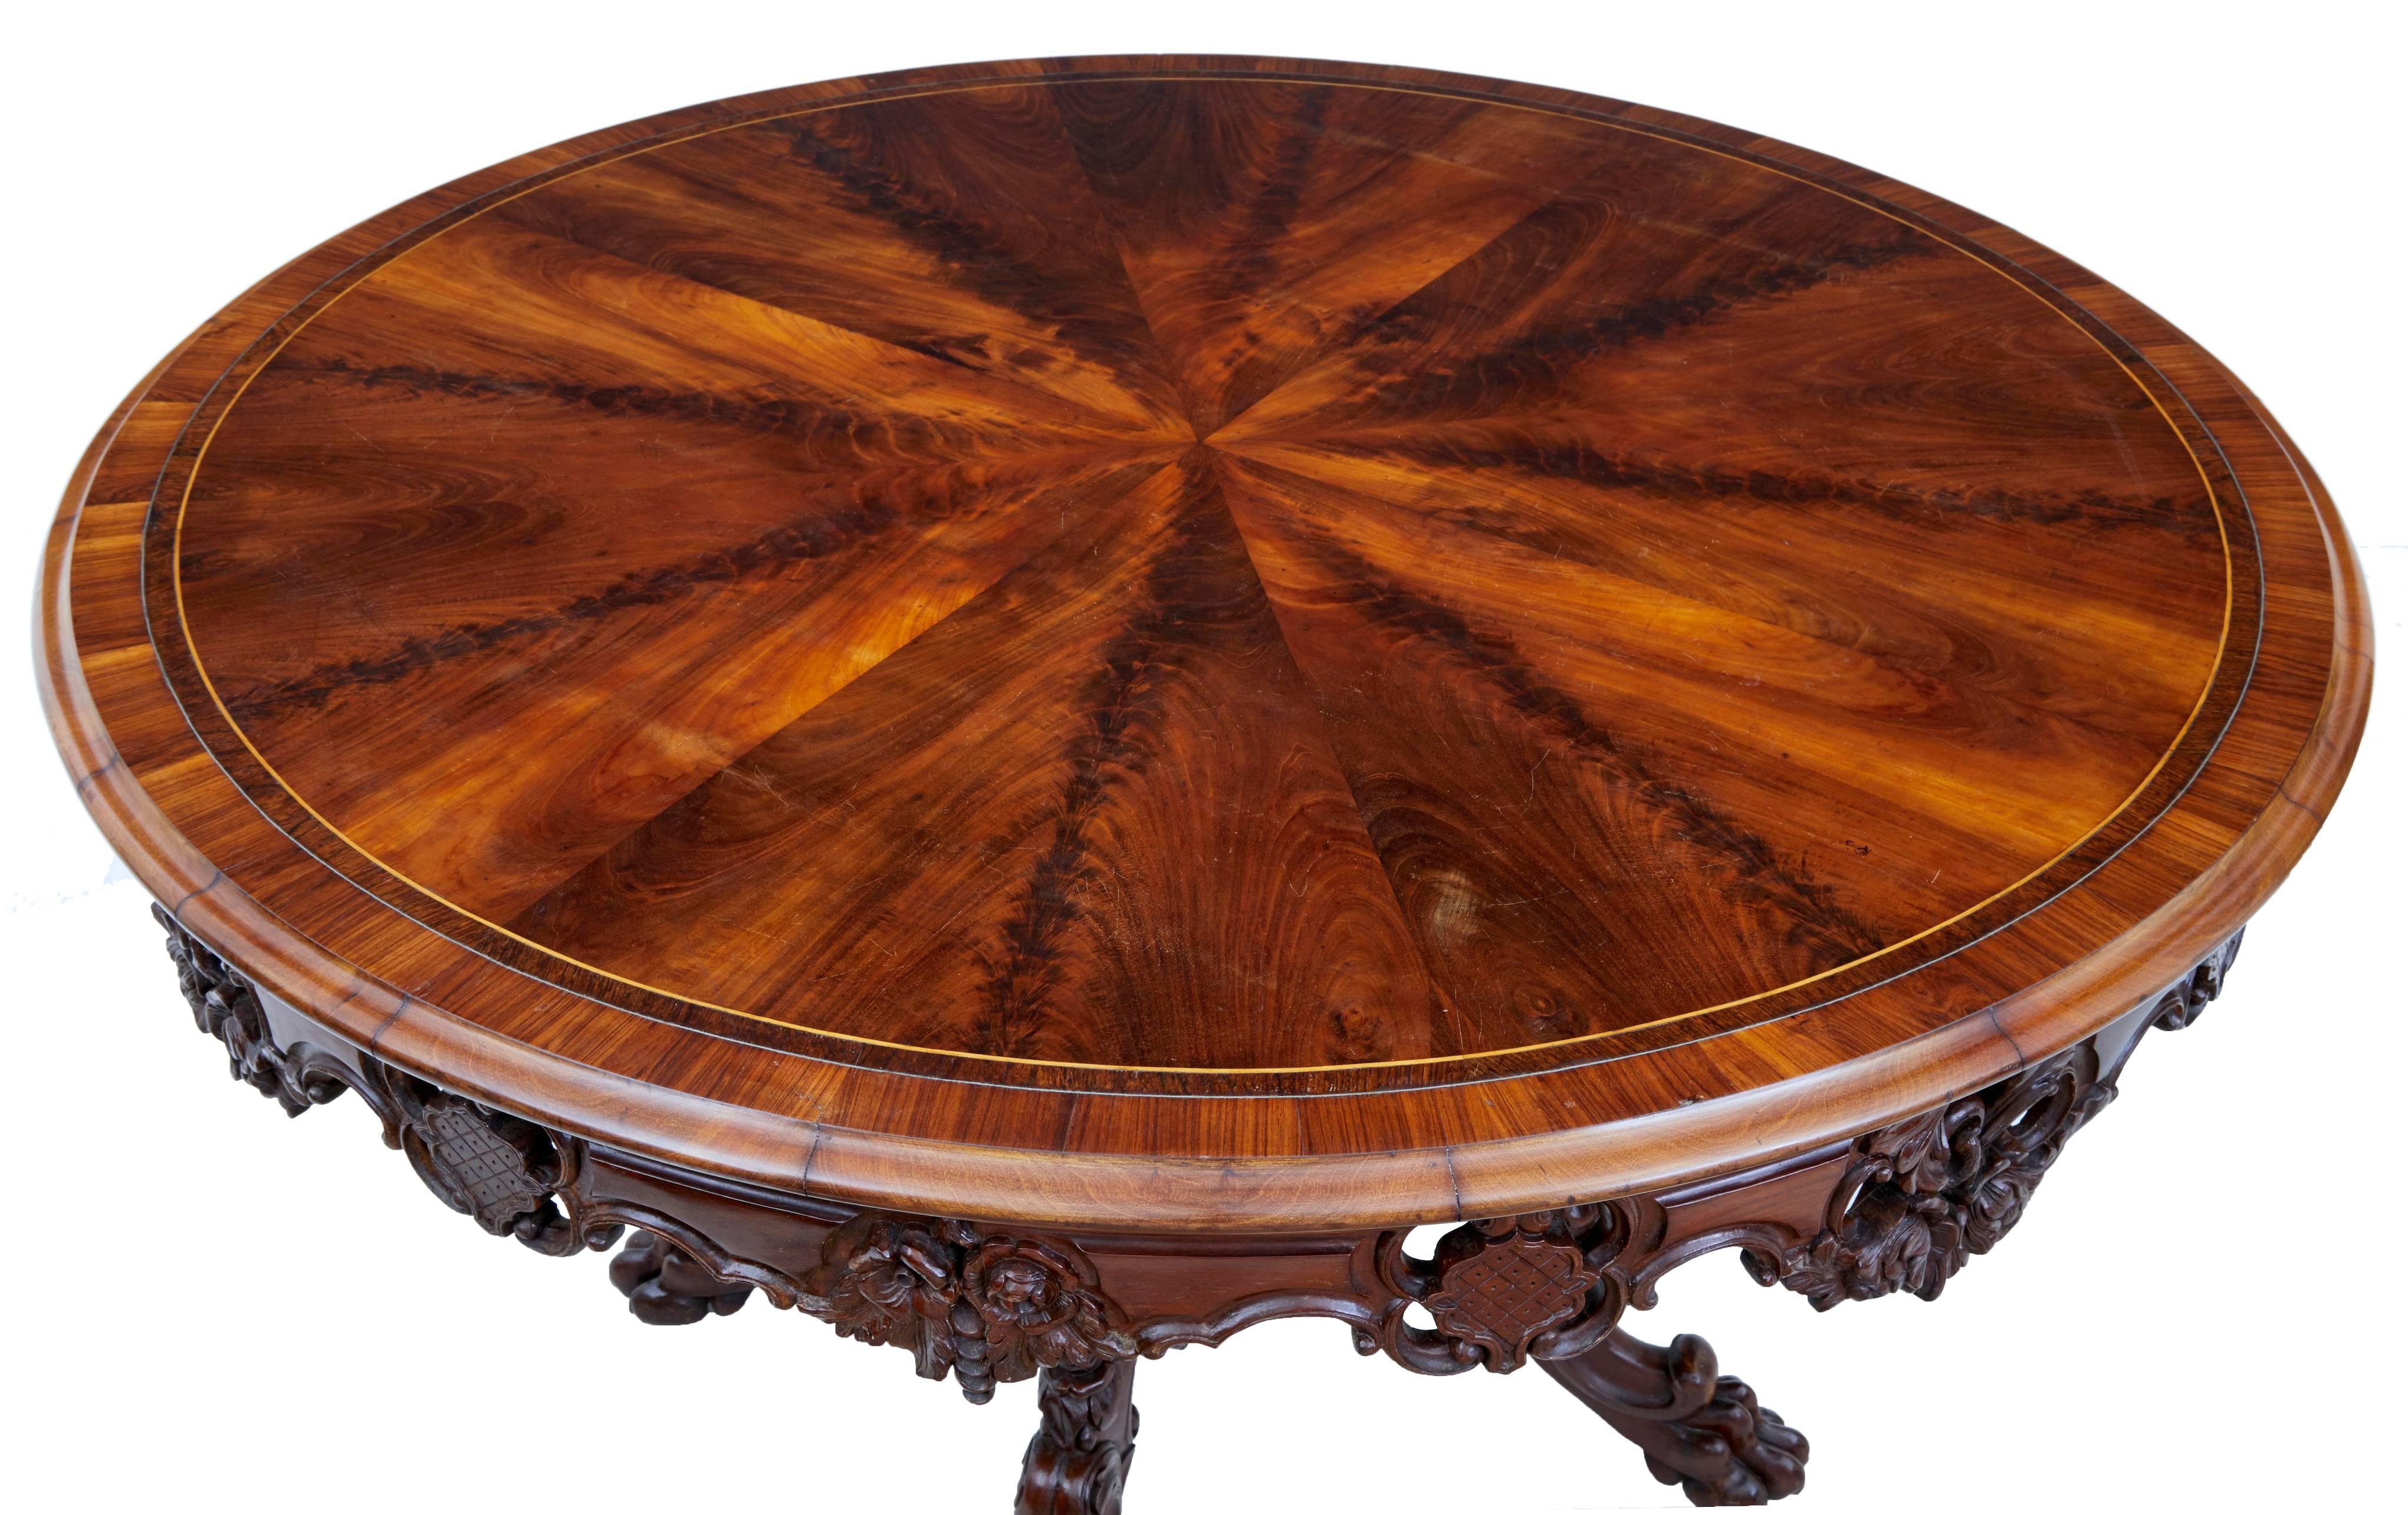 Good quality Danish centre table, circa 1860.
Flame mahogany top with boxwood stringing and pewter line, crossbanded with rosewood. Pierced carved apron.
Standing on a profusely carved base of four scrolling legs which surround a large central